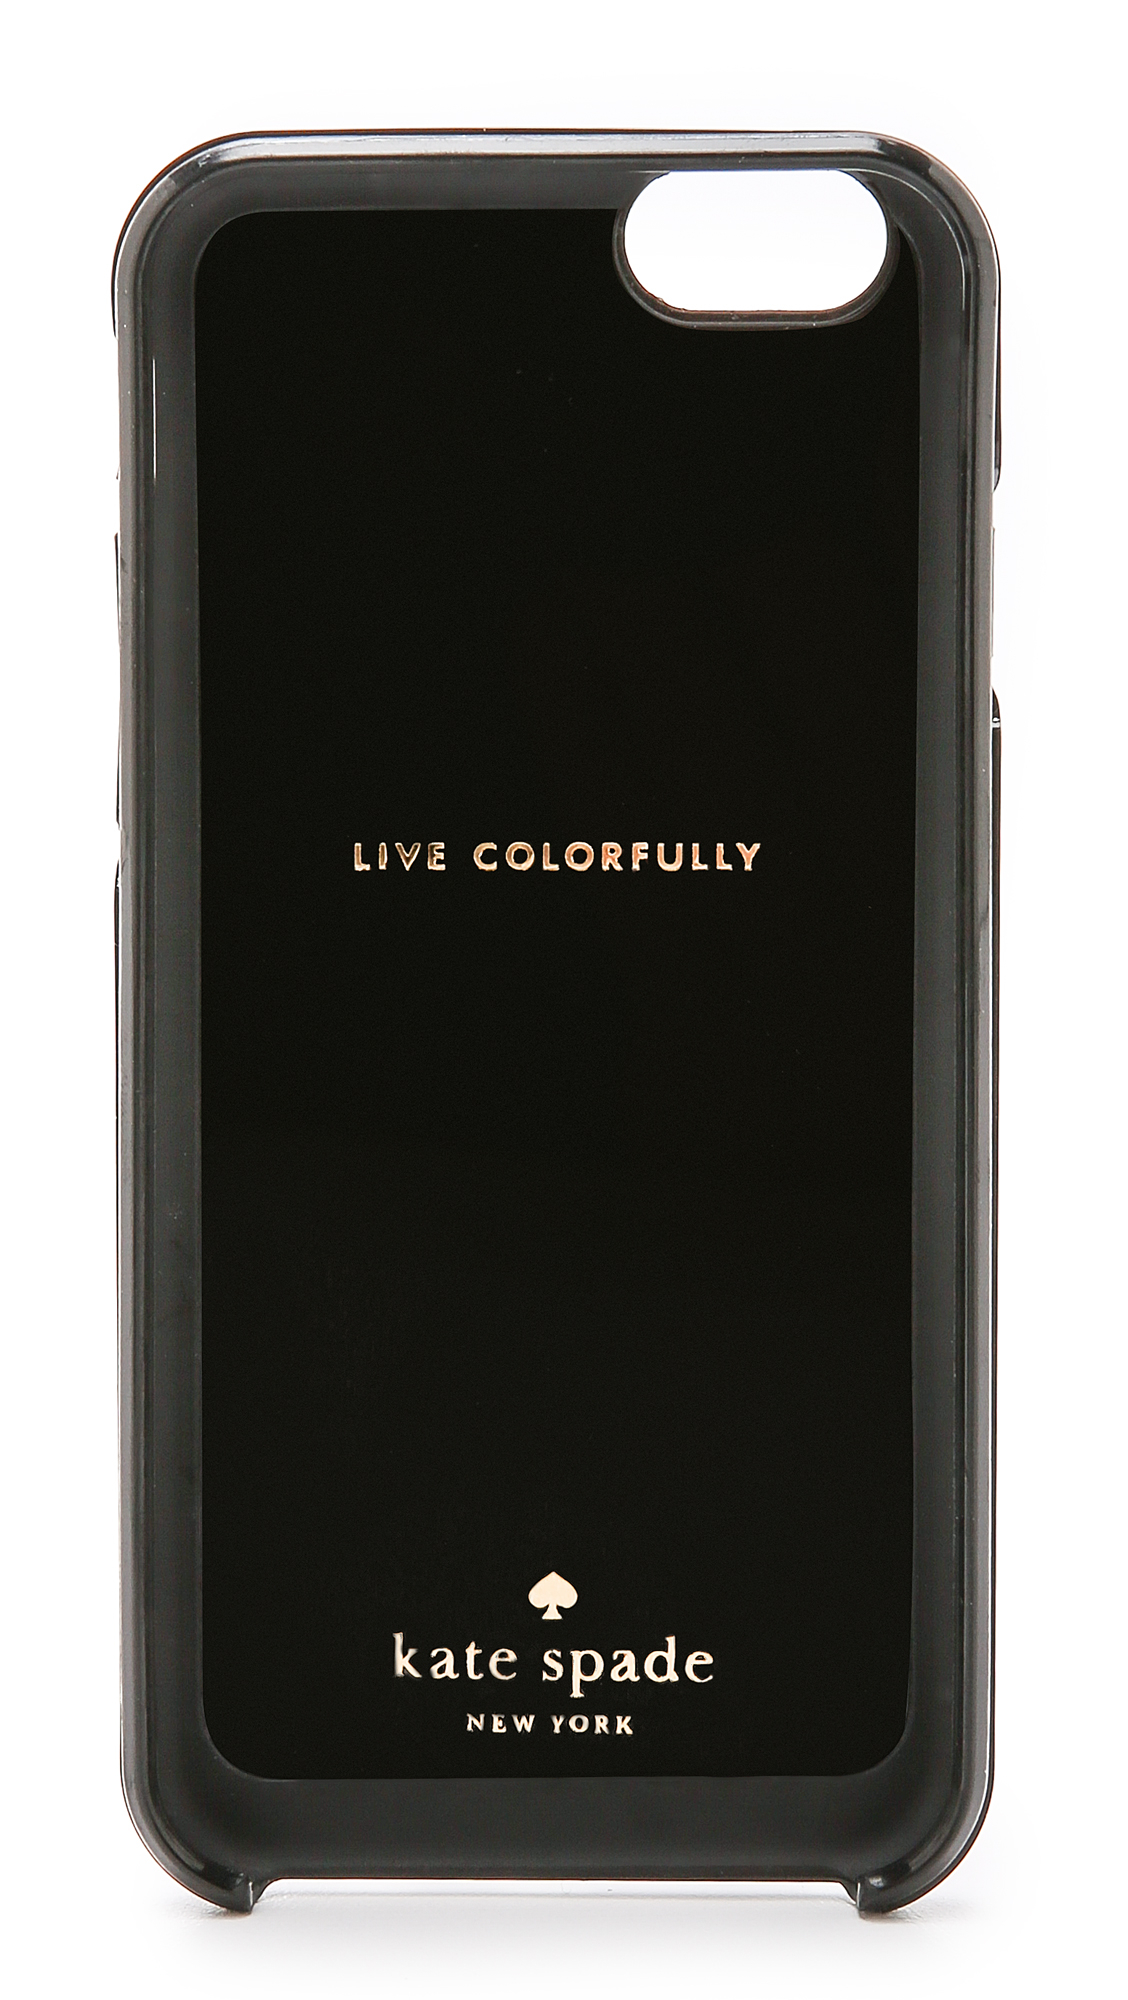 Kate spade Graphic Floral Iphone 6 Case - Black in Black | Lyst